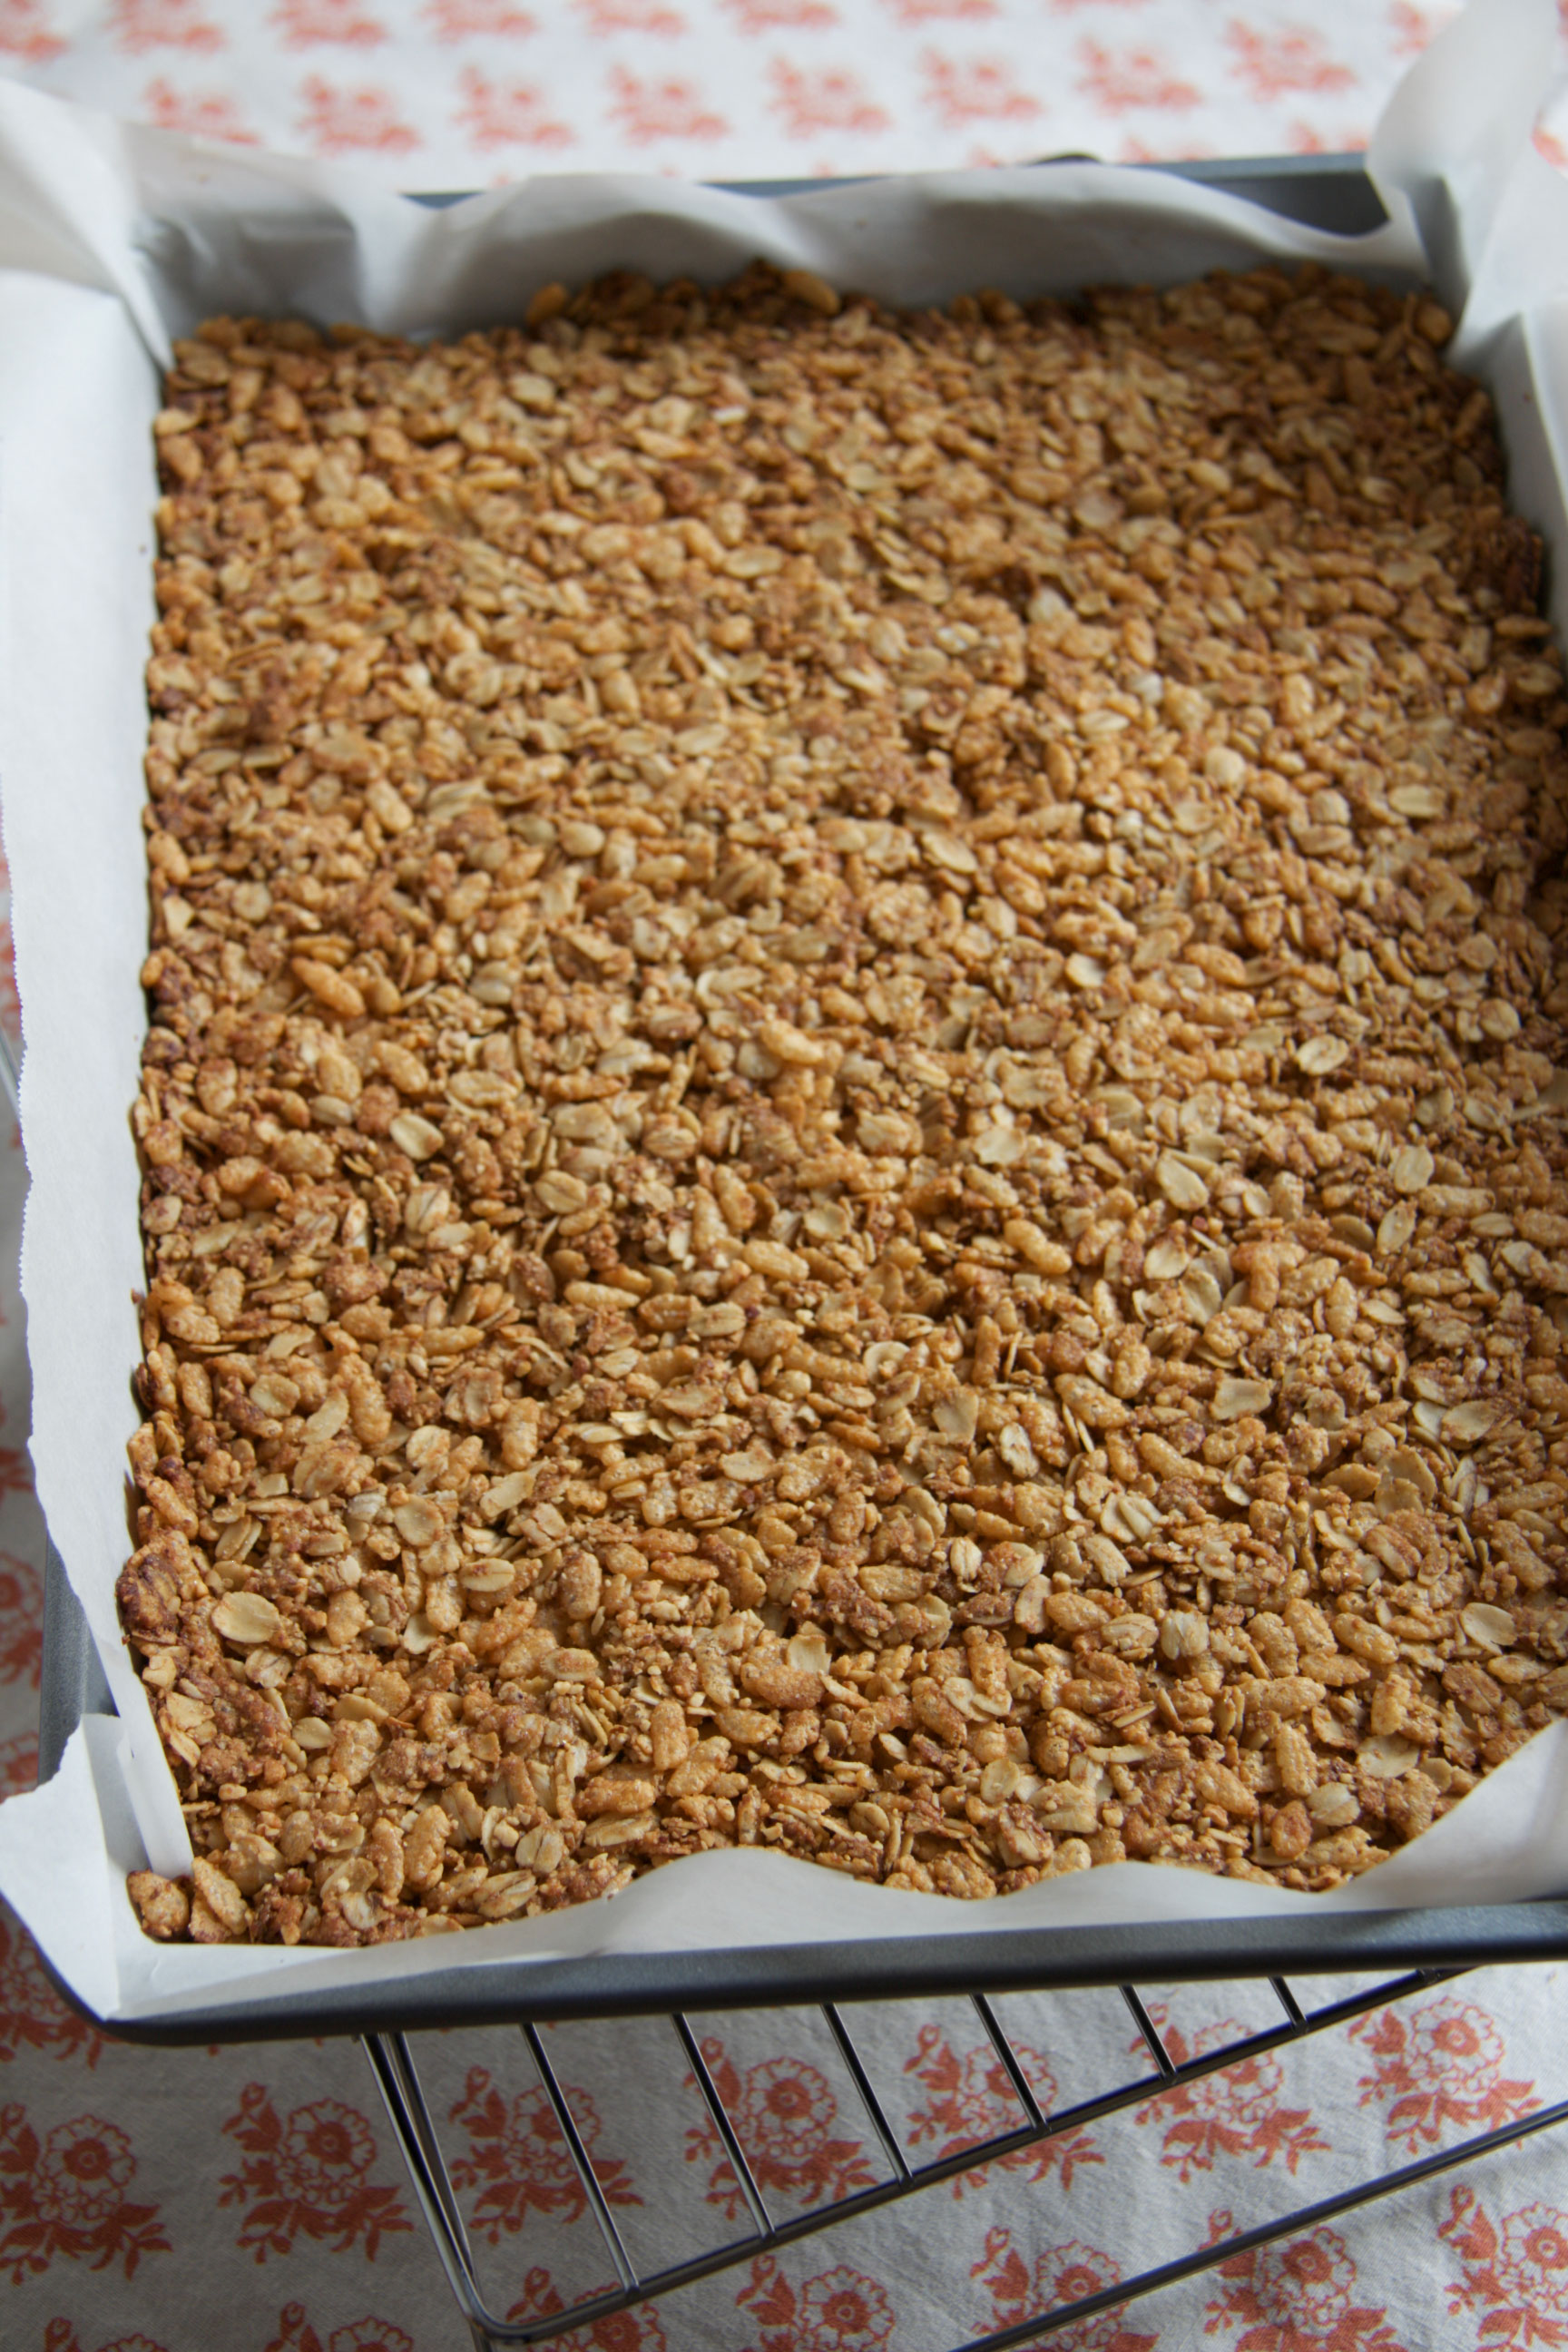 Homemade granola is the baked on a baking sheet is the base layer for these yummy Dark chocolate covered granola bars.